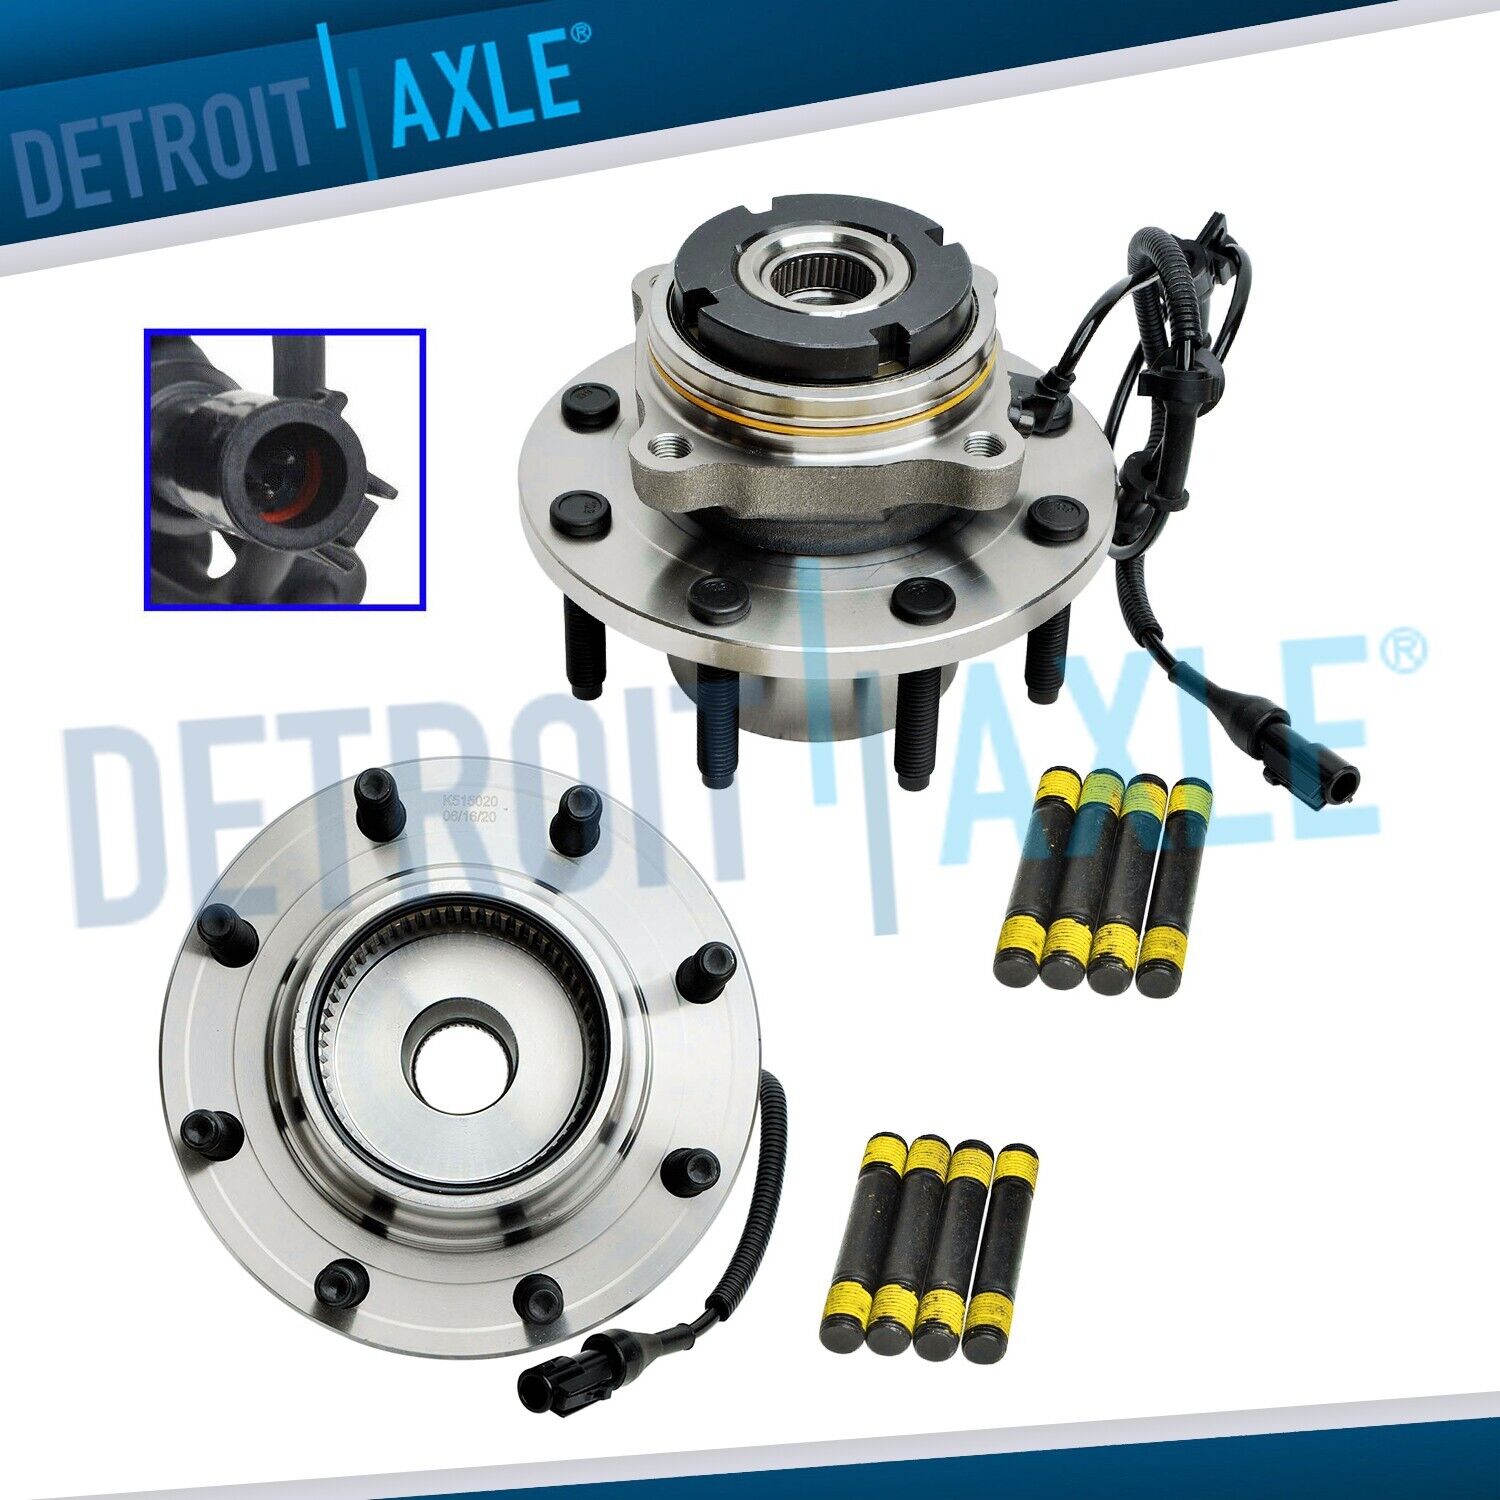 4WD Front Wheel Bearings and Hubs for 1999 - 2002 Ford F-250 F-350 SD Excursion